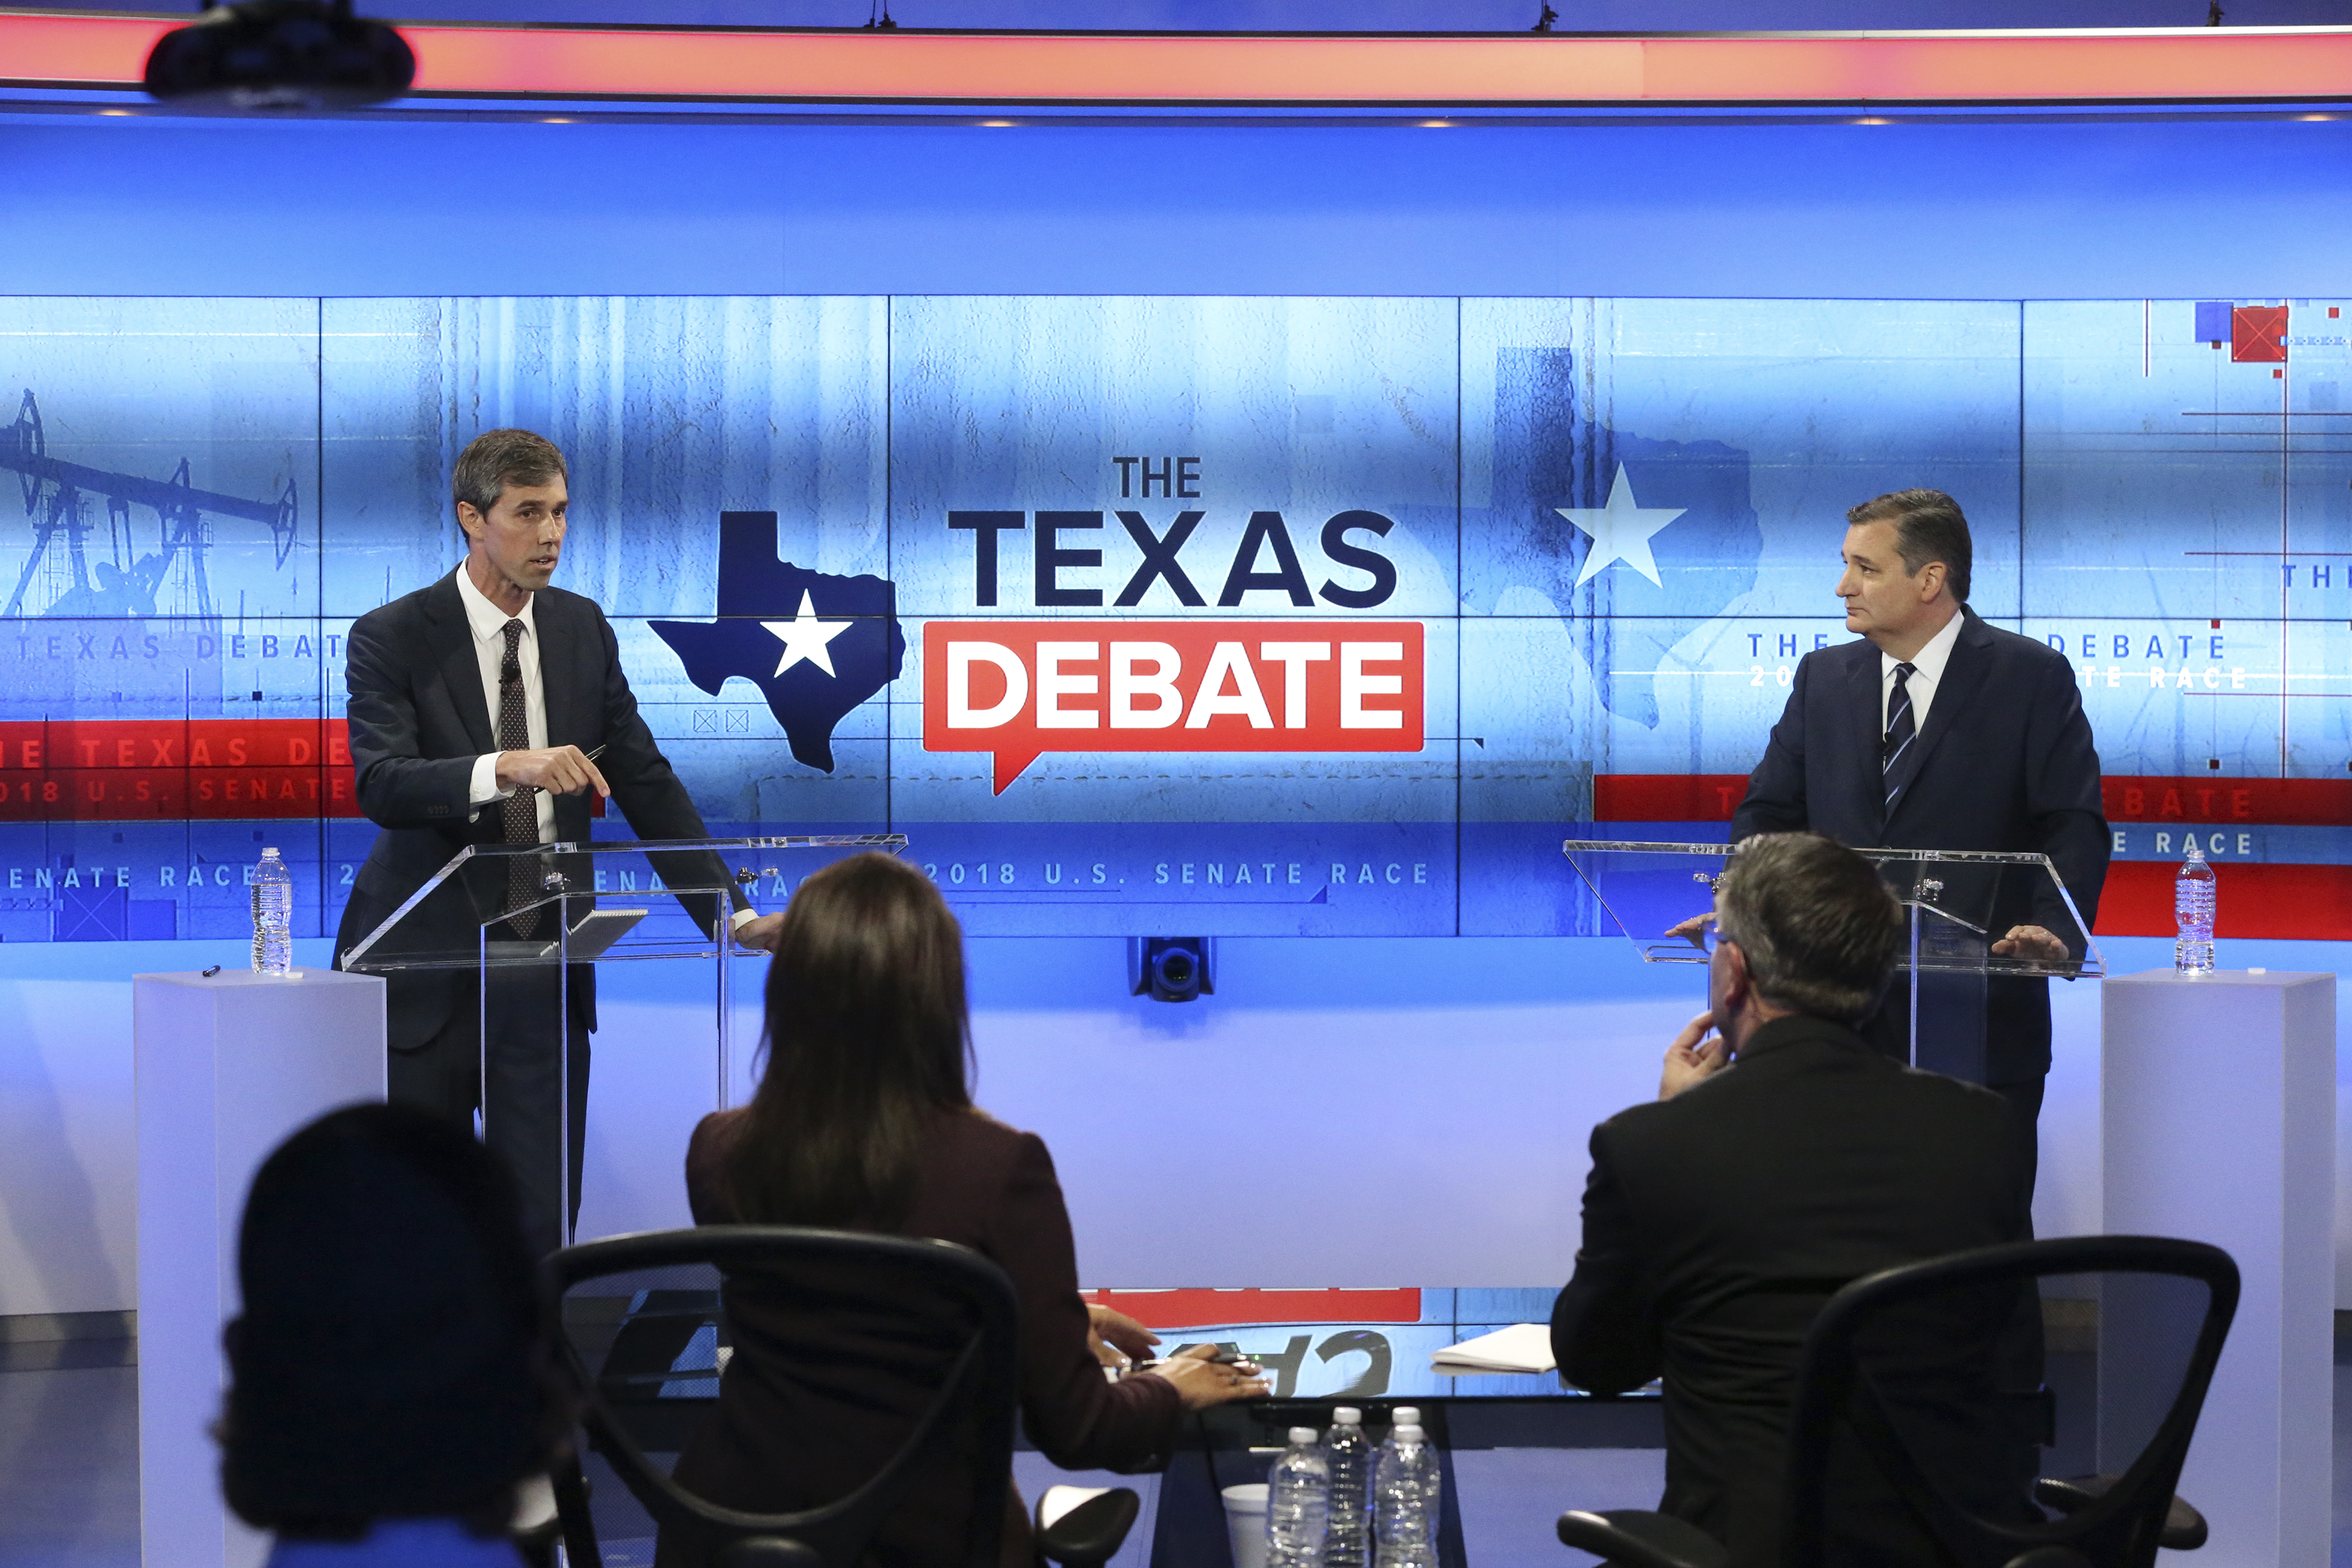 U.S. Rep. Beto O'Rourke (D-TX) (L) and U.S. Sen. Ted Cruz (R-TX) face off in a debate at the KENS 5 studios on October 16, 2018 in San Antonio, Texas. A recent poll show Cruz leading O'Rourke 52-45 percent among likely voters. Tom Reel-Pool/Getty Images